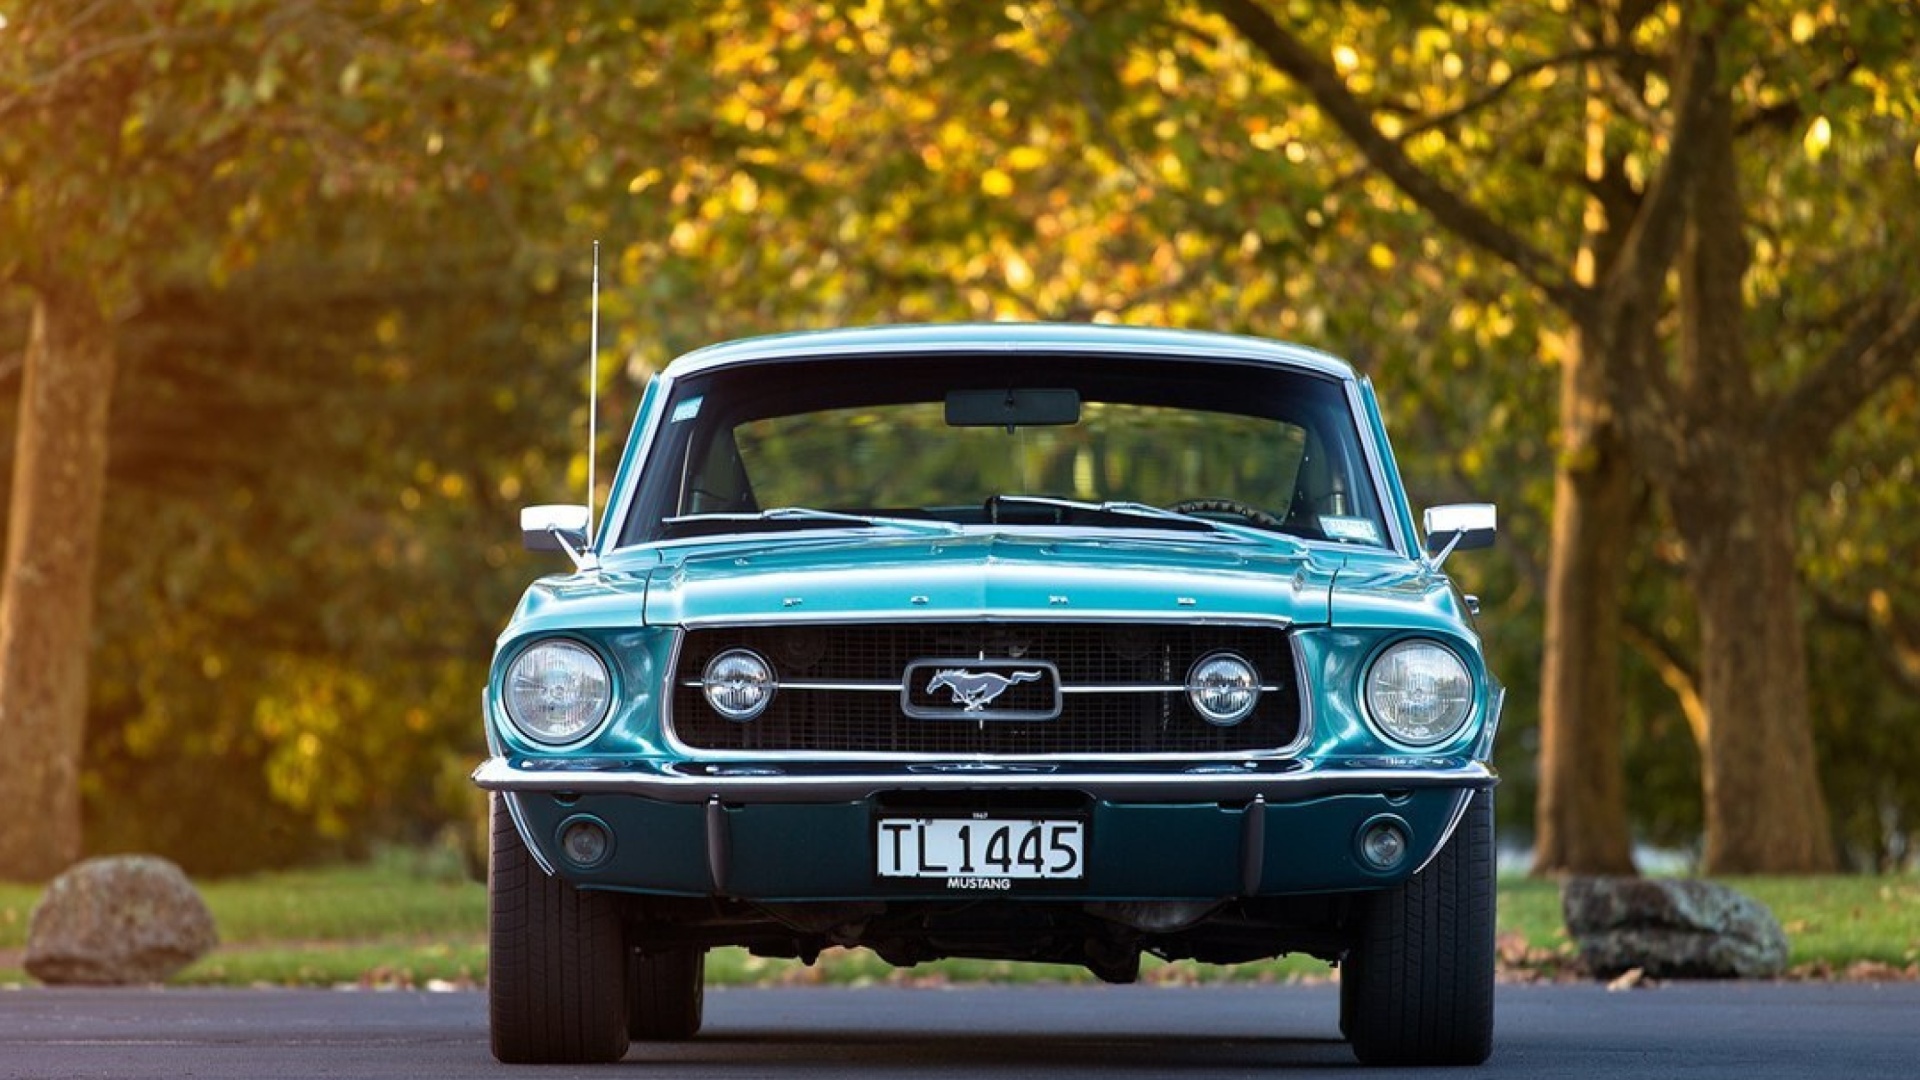 Ford Mustang First Generation wallpaper 1920x1080